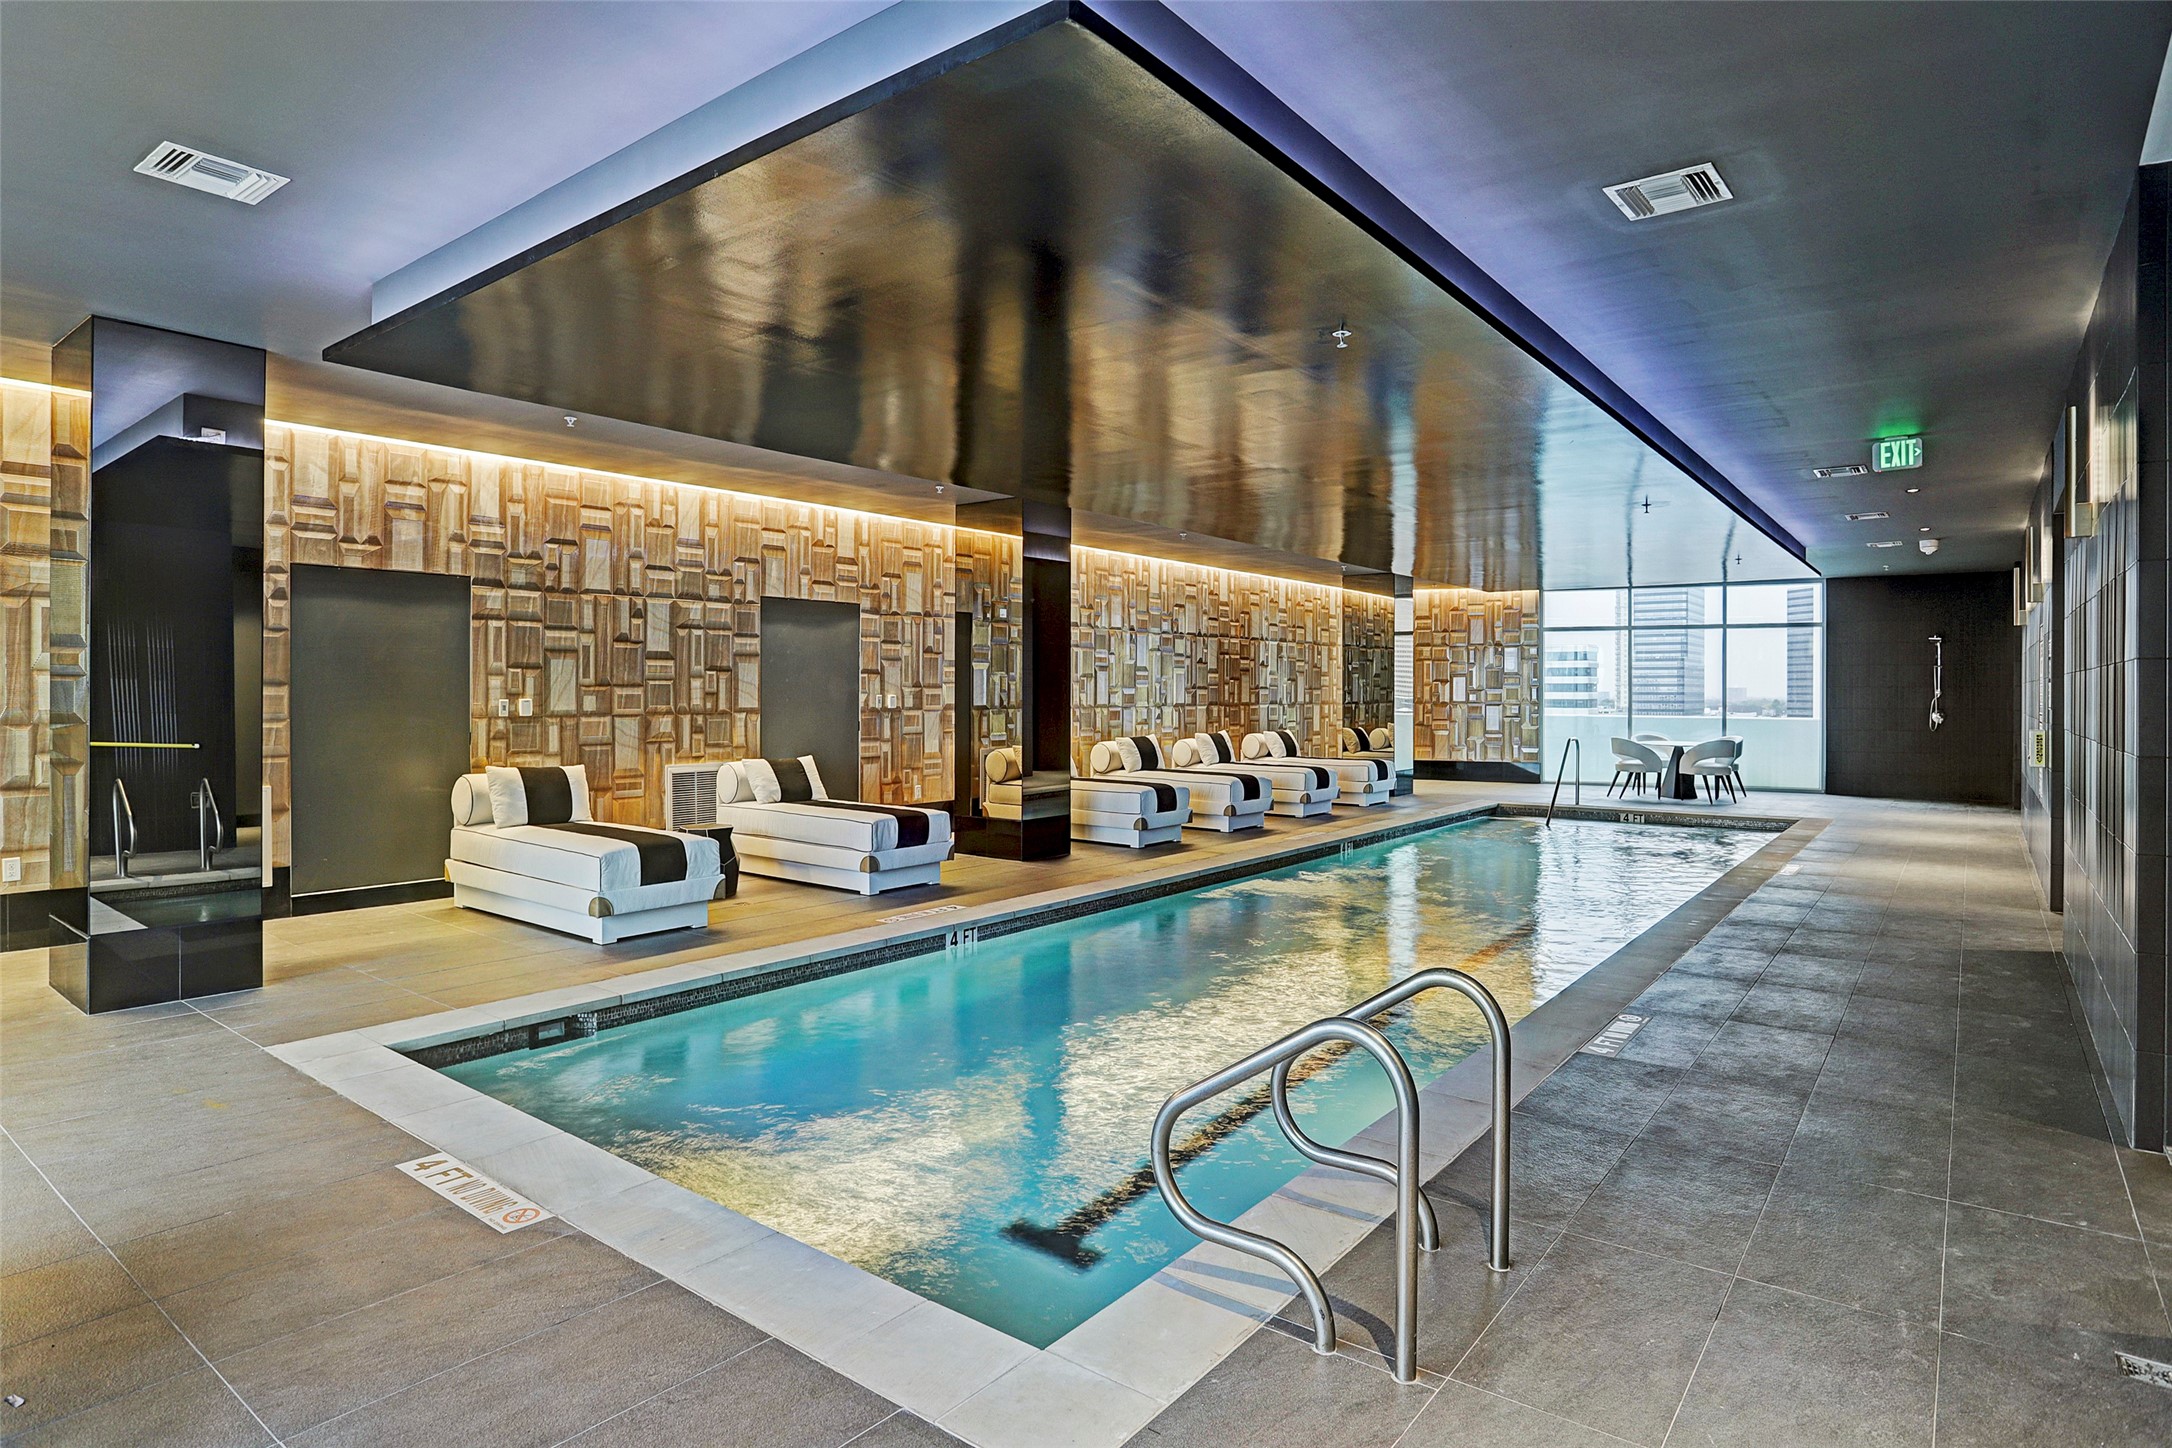 The spa-like indoor pool features walls of glass as well as immediate access to a sauna, massage room and pet salon